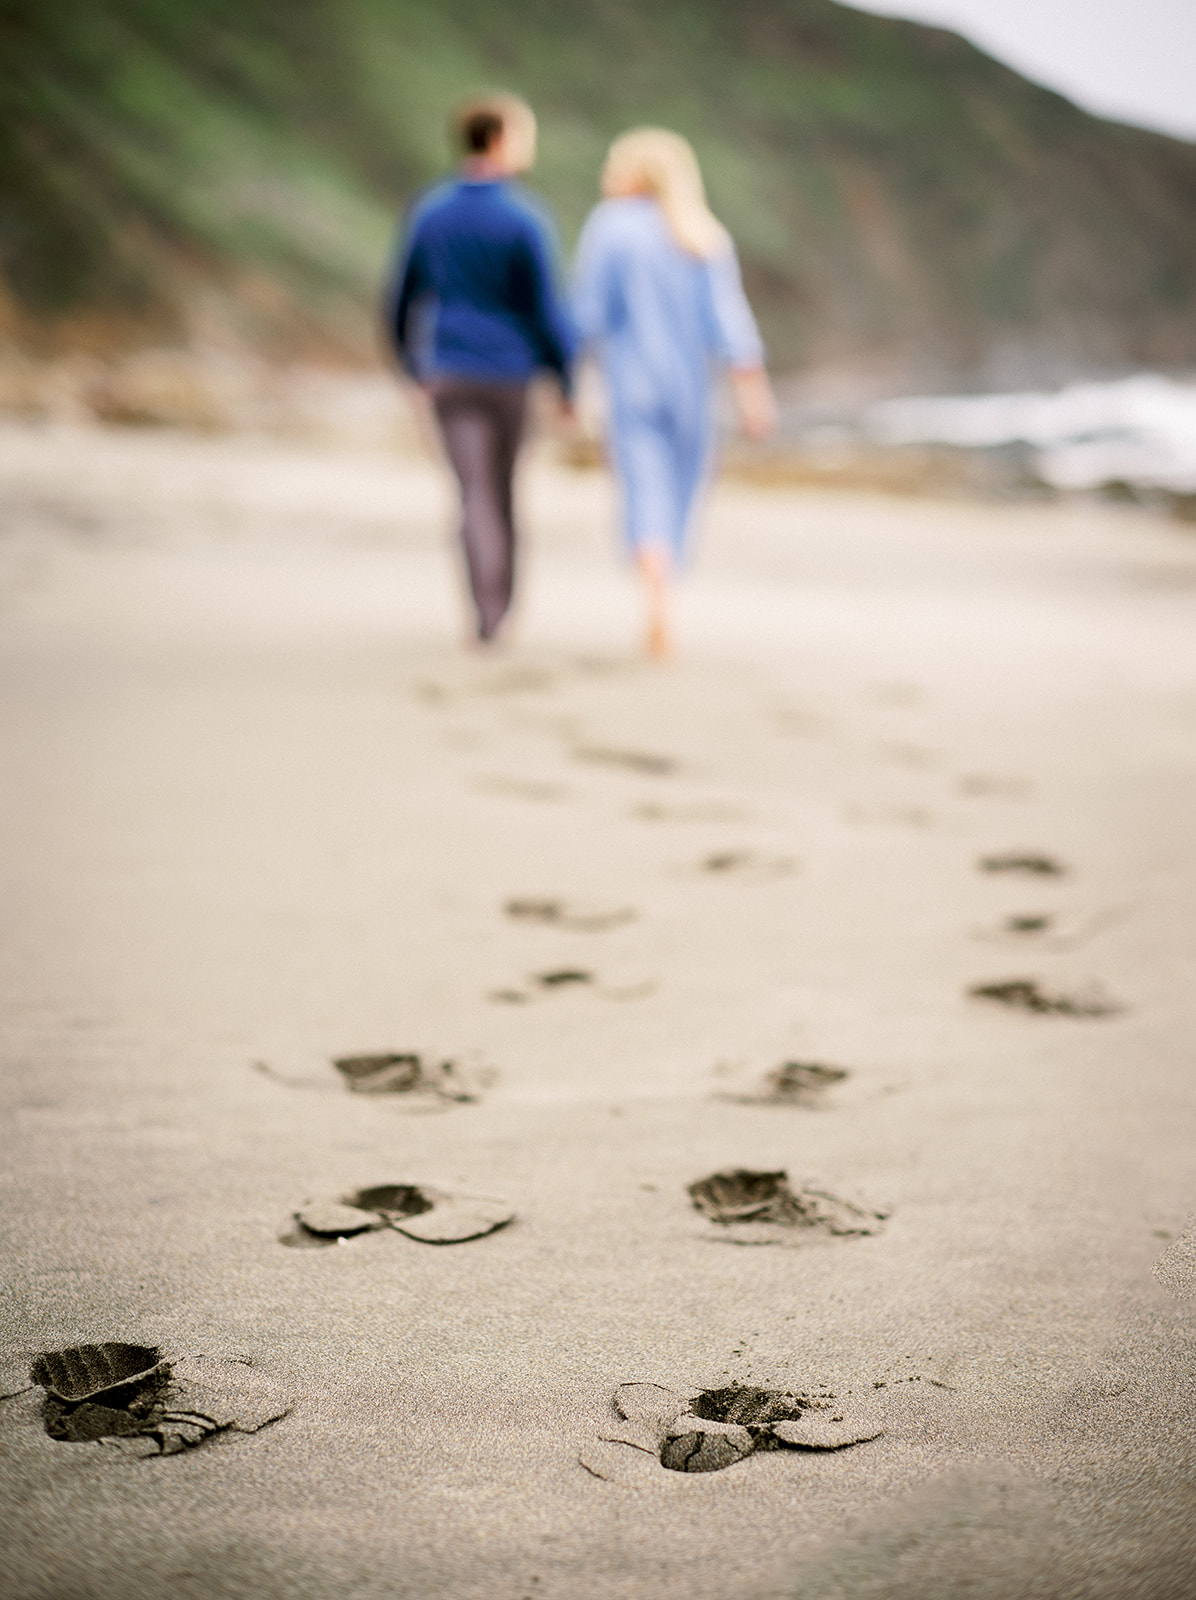 Walking away at Mclure's beach in Marin County.